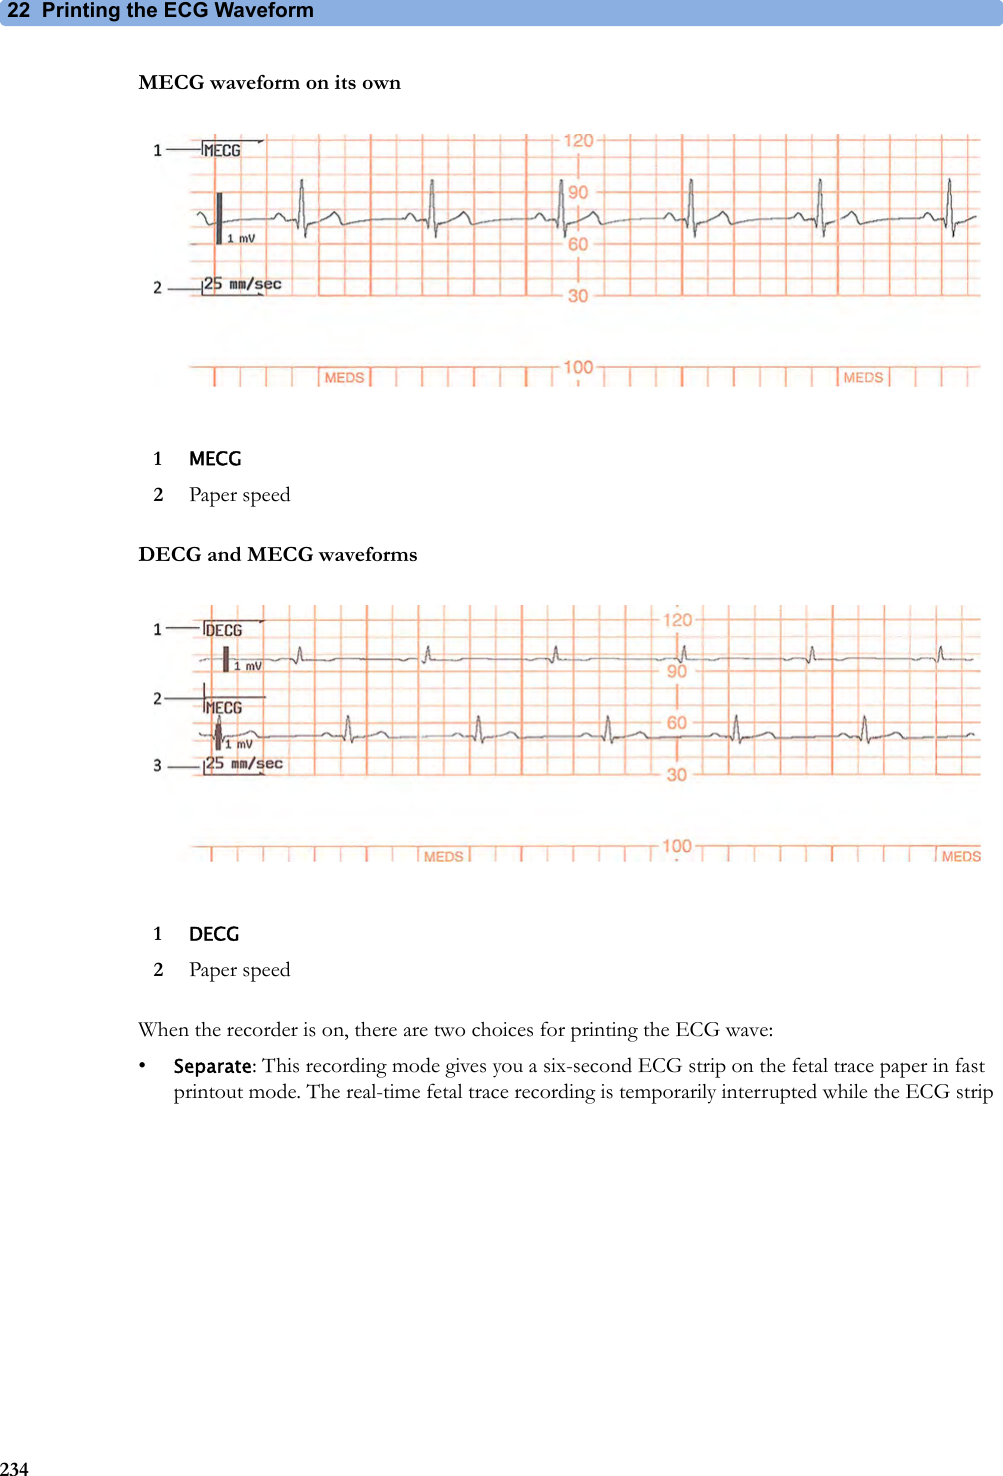 22 Printing the ECG Waveform234MECG waveform on its ownDECG and MECG waveformsWhen the recorder is on, there are two choices for printing the ECG wave:•Separate: This recording mode gives you a six-second ECG strip on the fetal trace paper in fast printout mode. The real-time fetal trace recording is temporarily interrupted while the ECG strip 1MECG2Paper speed1DECG2Paper speed